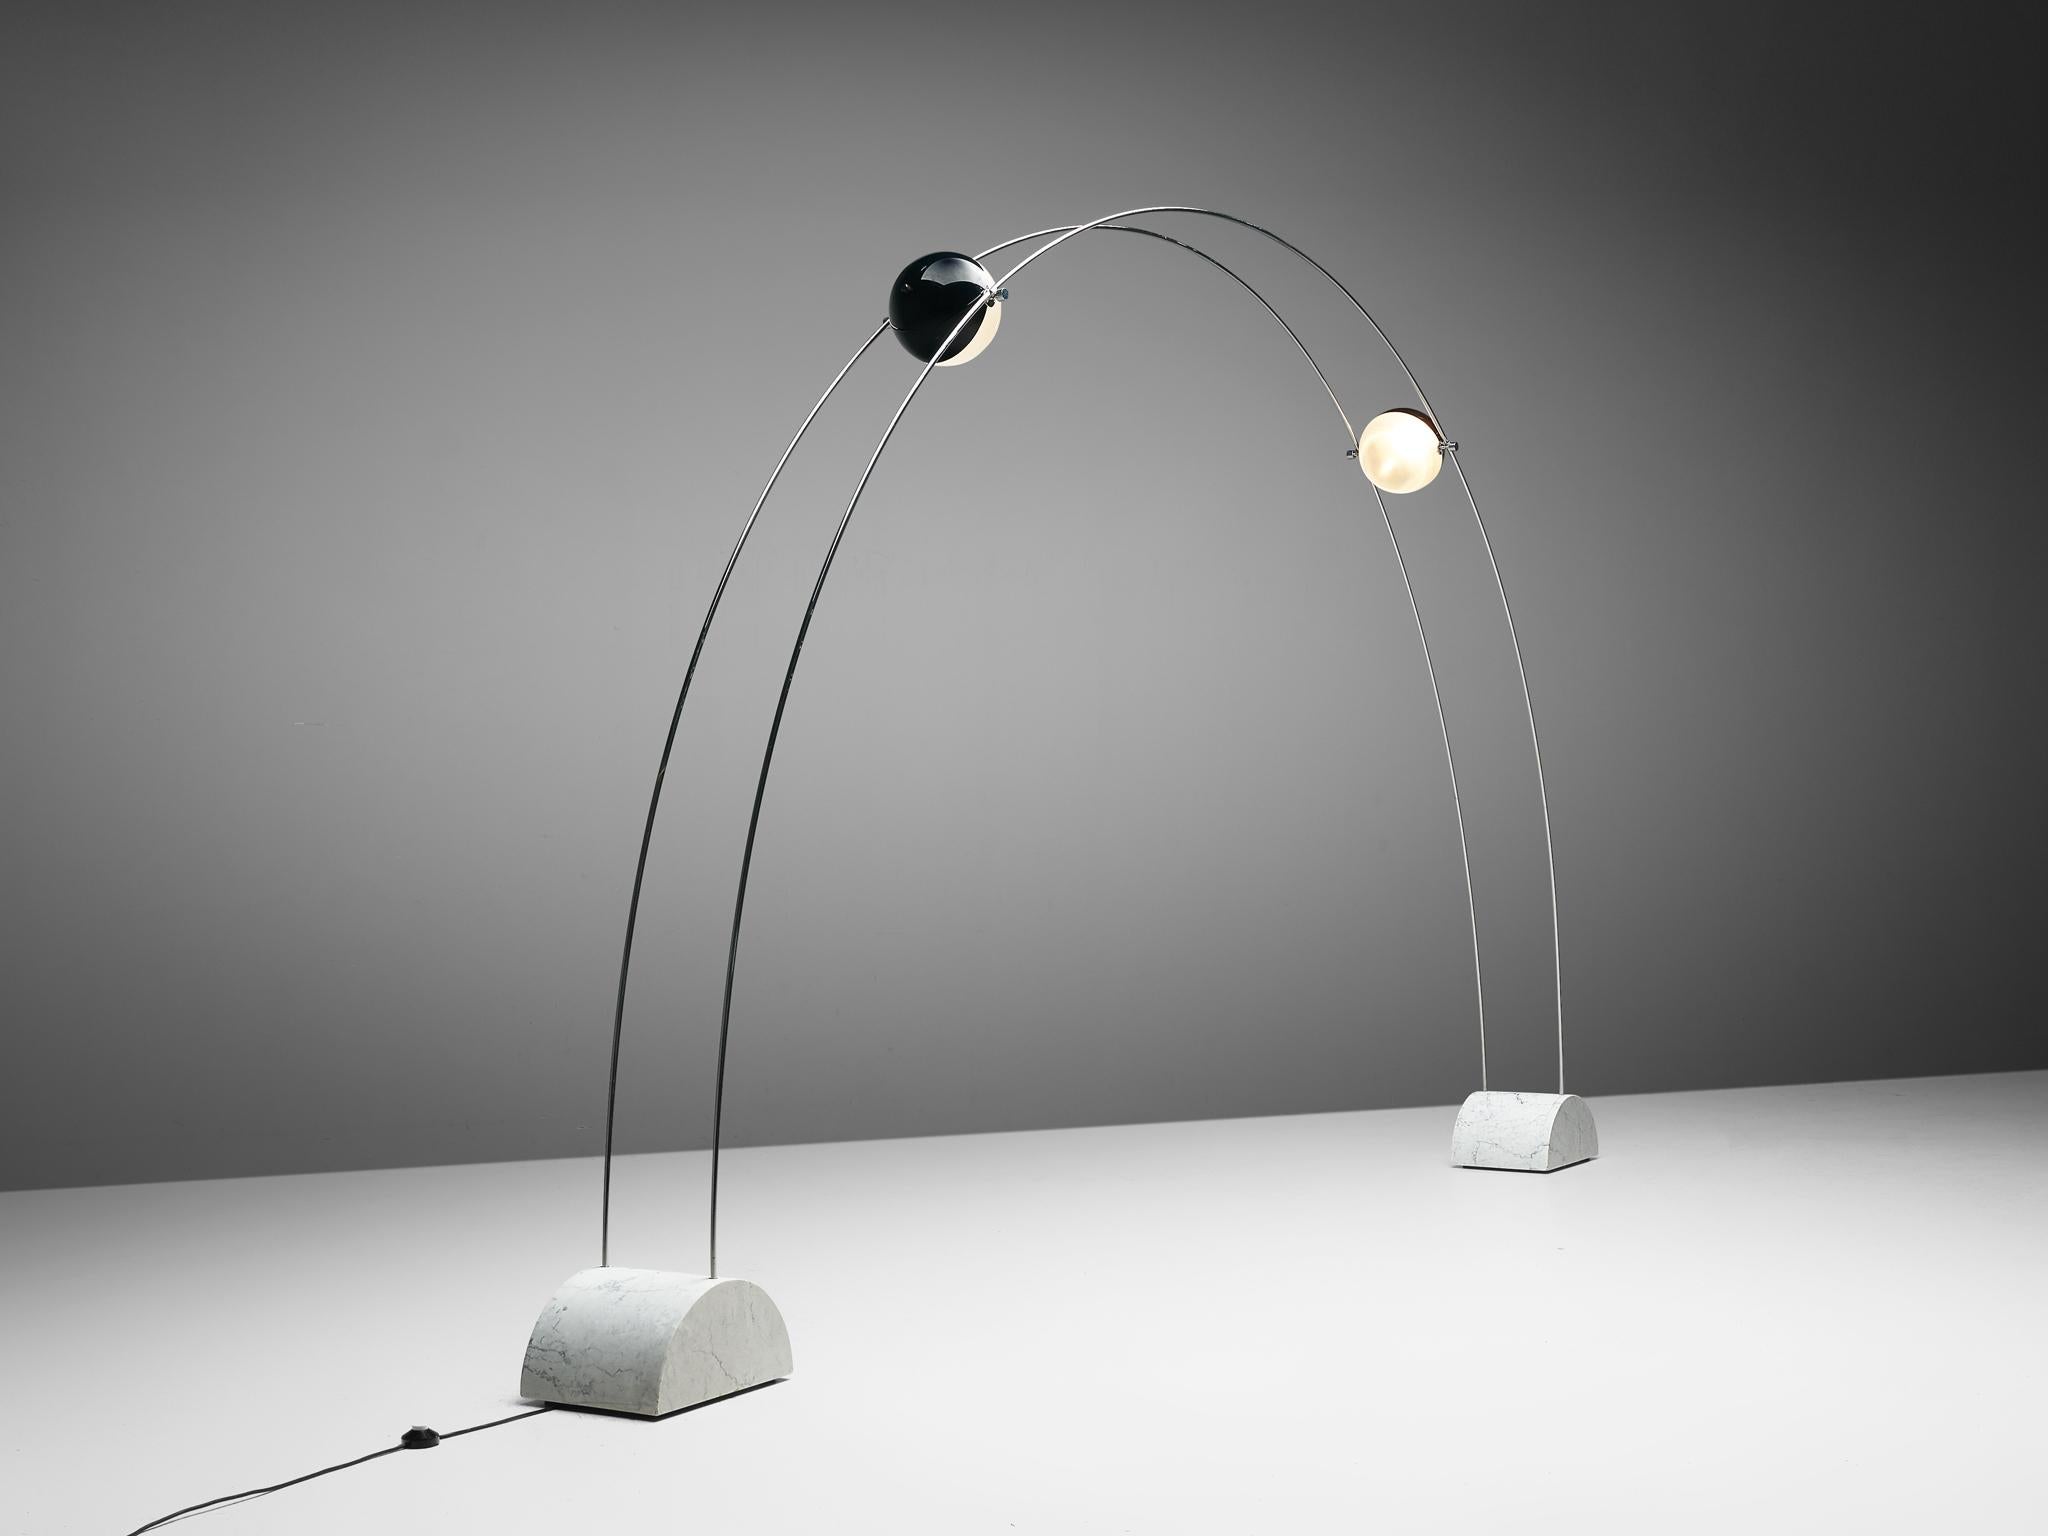 Studio A.R.D.I.T.I. for Sormani Nucleo Division, floor lamp model 'Ponte', Carrara marble, chrome-plated metal, acrylic, Italy, 1971

Lighting sculpture by Studio A.R.D.I.T.I. for Sormani Nucleo Division. This wonderful artistic floor lamp spans an